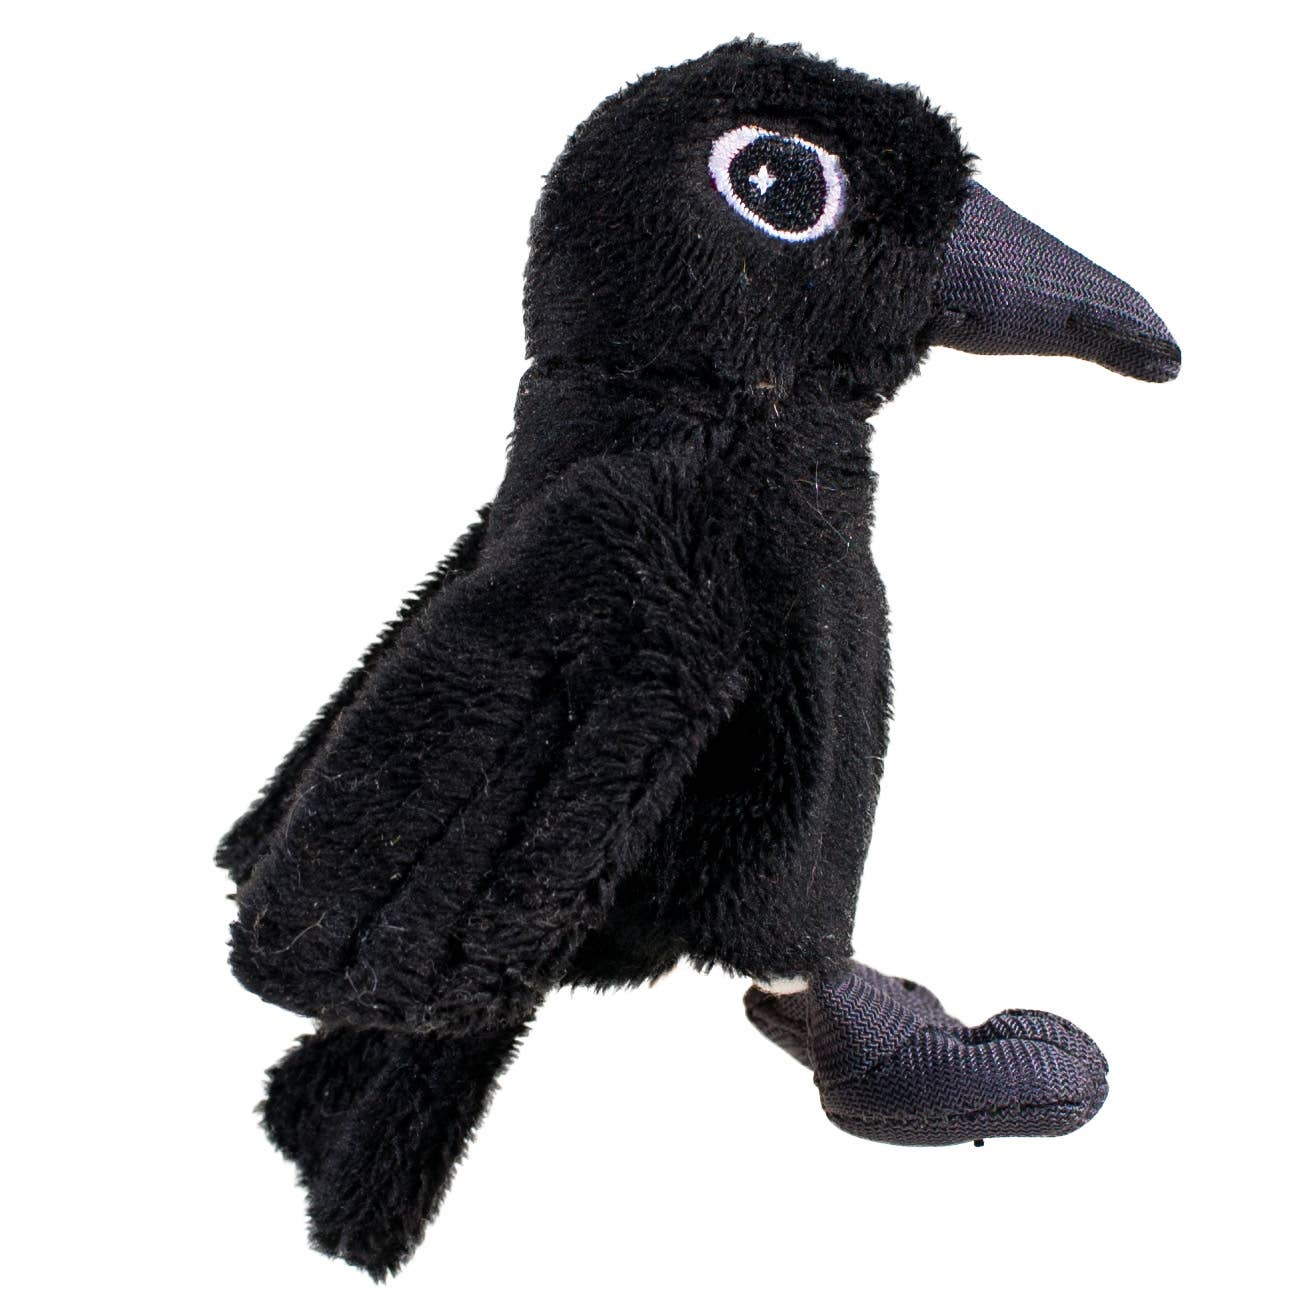 Raven Finger Puppet from Unemployed Philosophers Guild